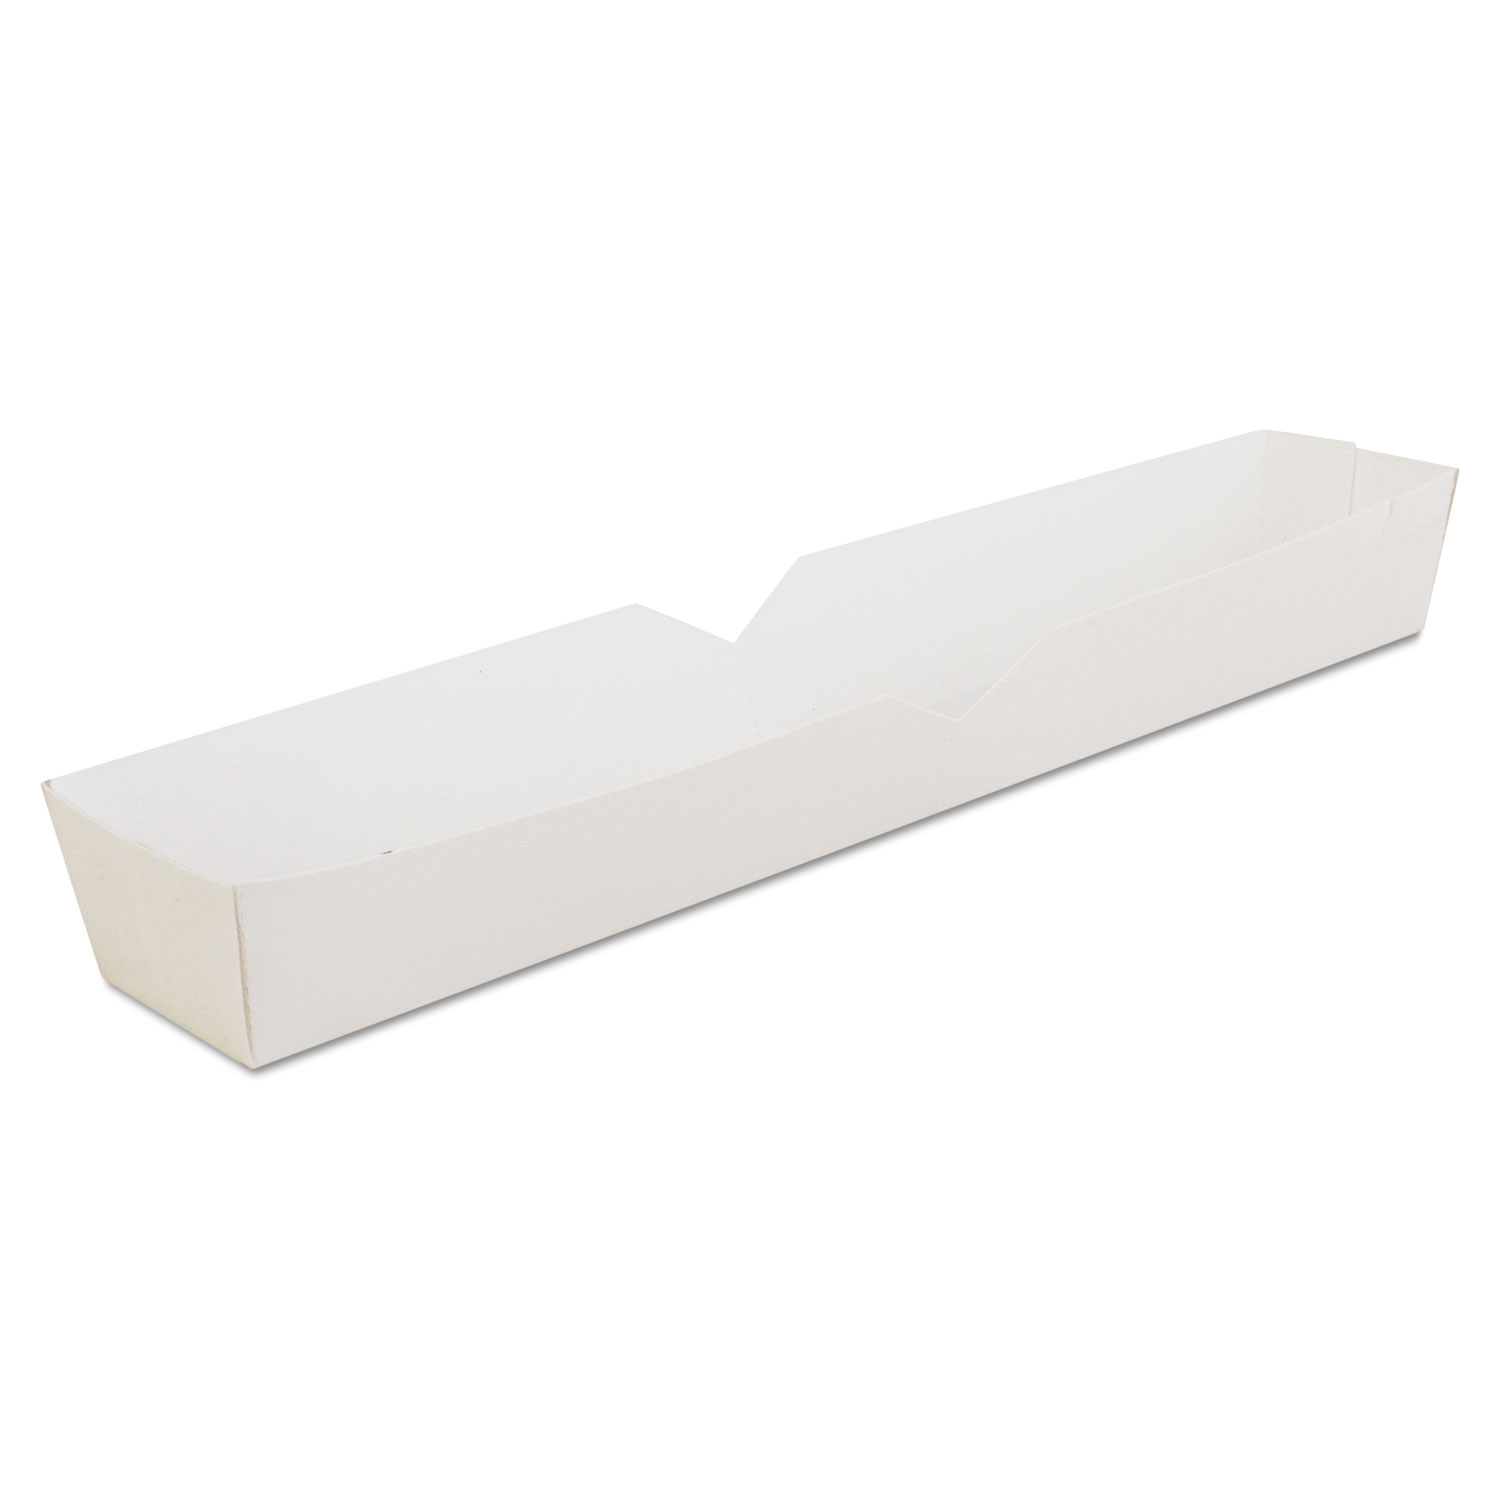 Hot Dog Tray, White, 10 1/4 x 1 1/2 x 1 1/4, Paperboard, 500/Carton